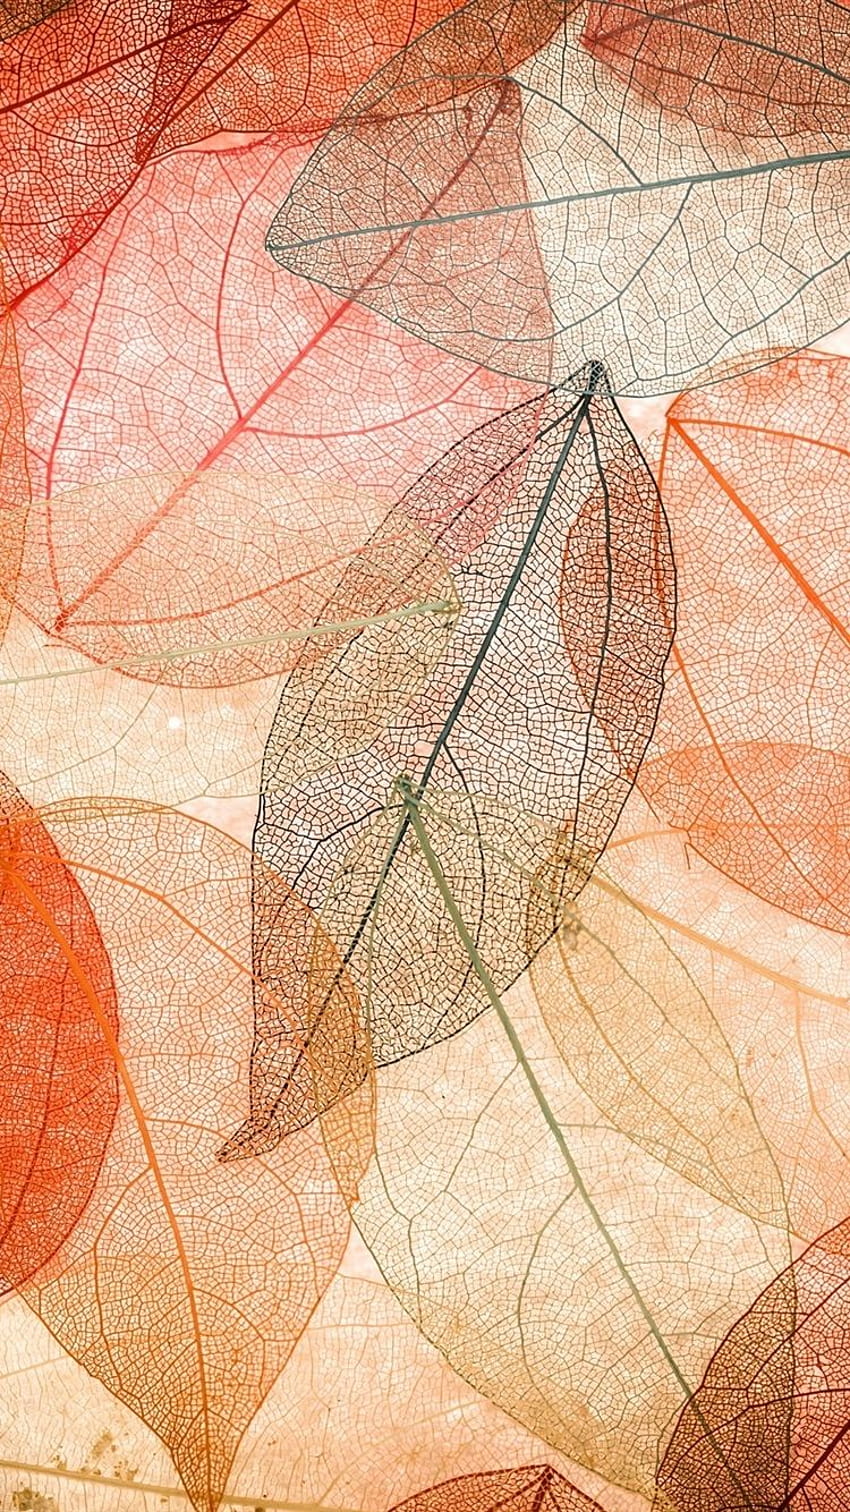 Iphone Autumn, Transparent Leaves, Abstract, abstract autumn HD phone wallpaper